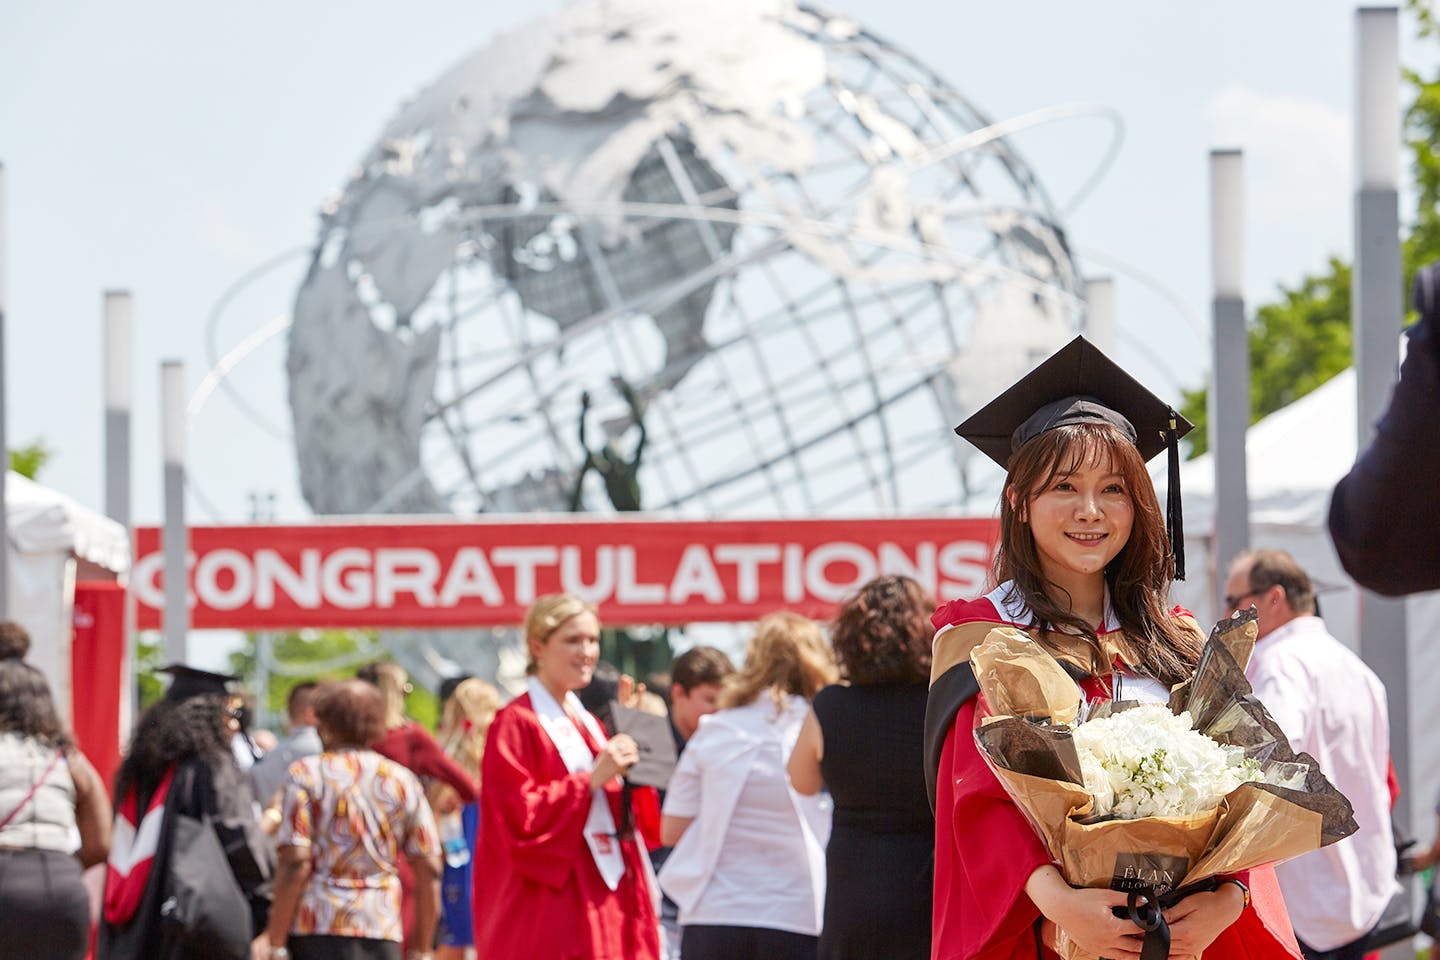 A New school graduate holding a bouquet of white flowers